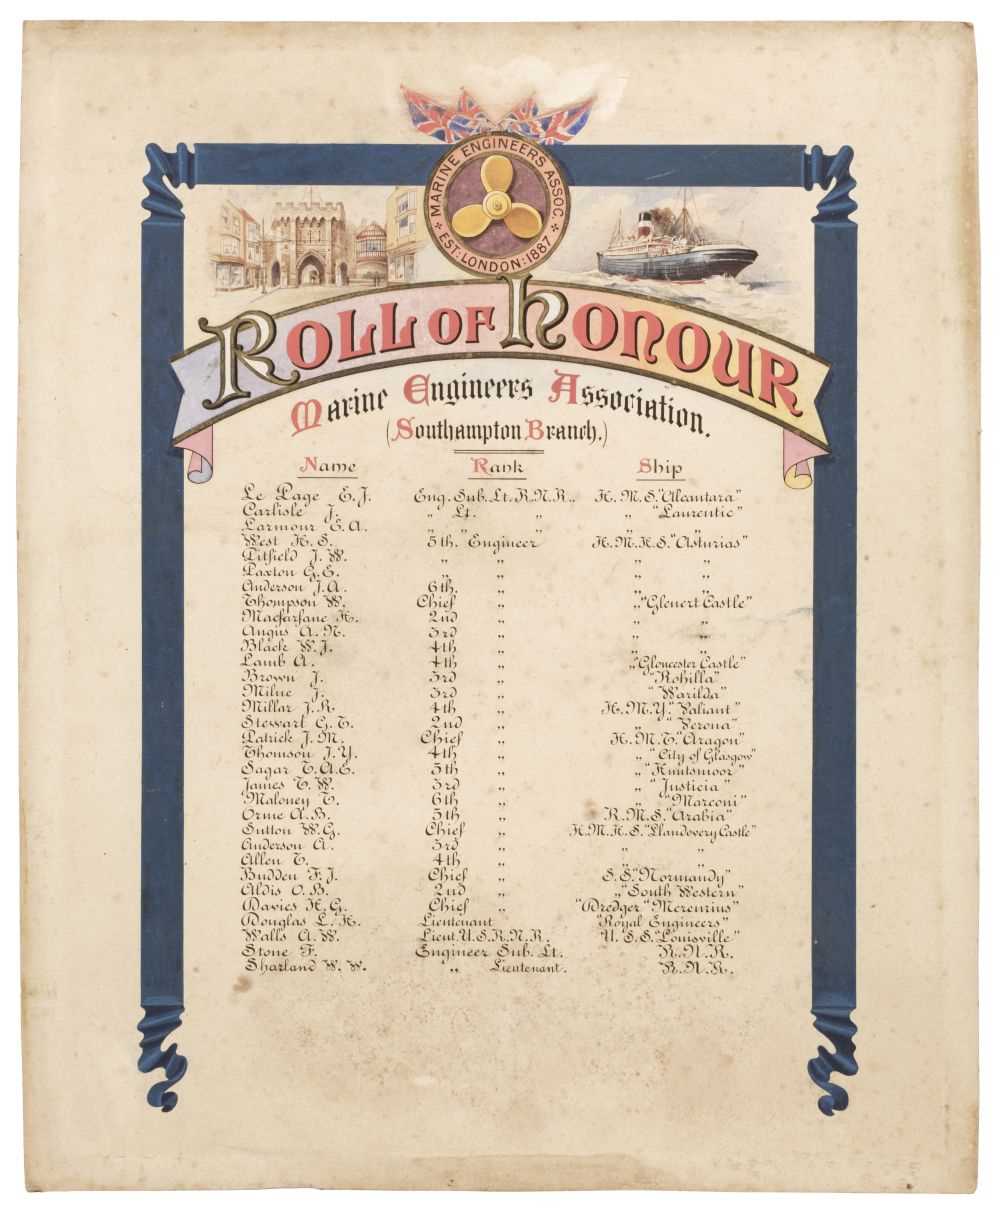 Lot 398 - WWI Roll of Honour. Marine Engineers Association (Southampton Branch)